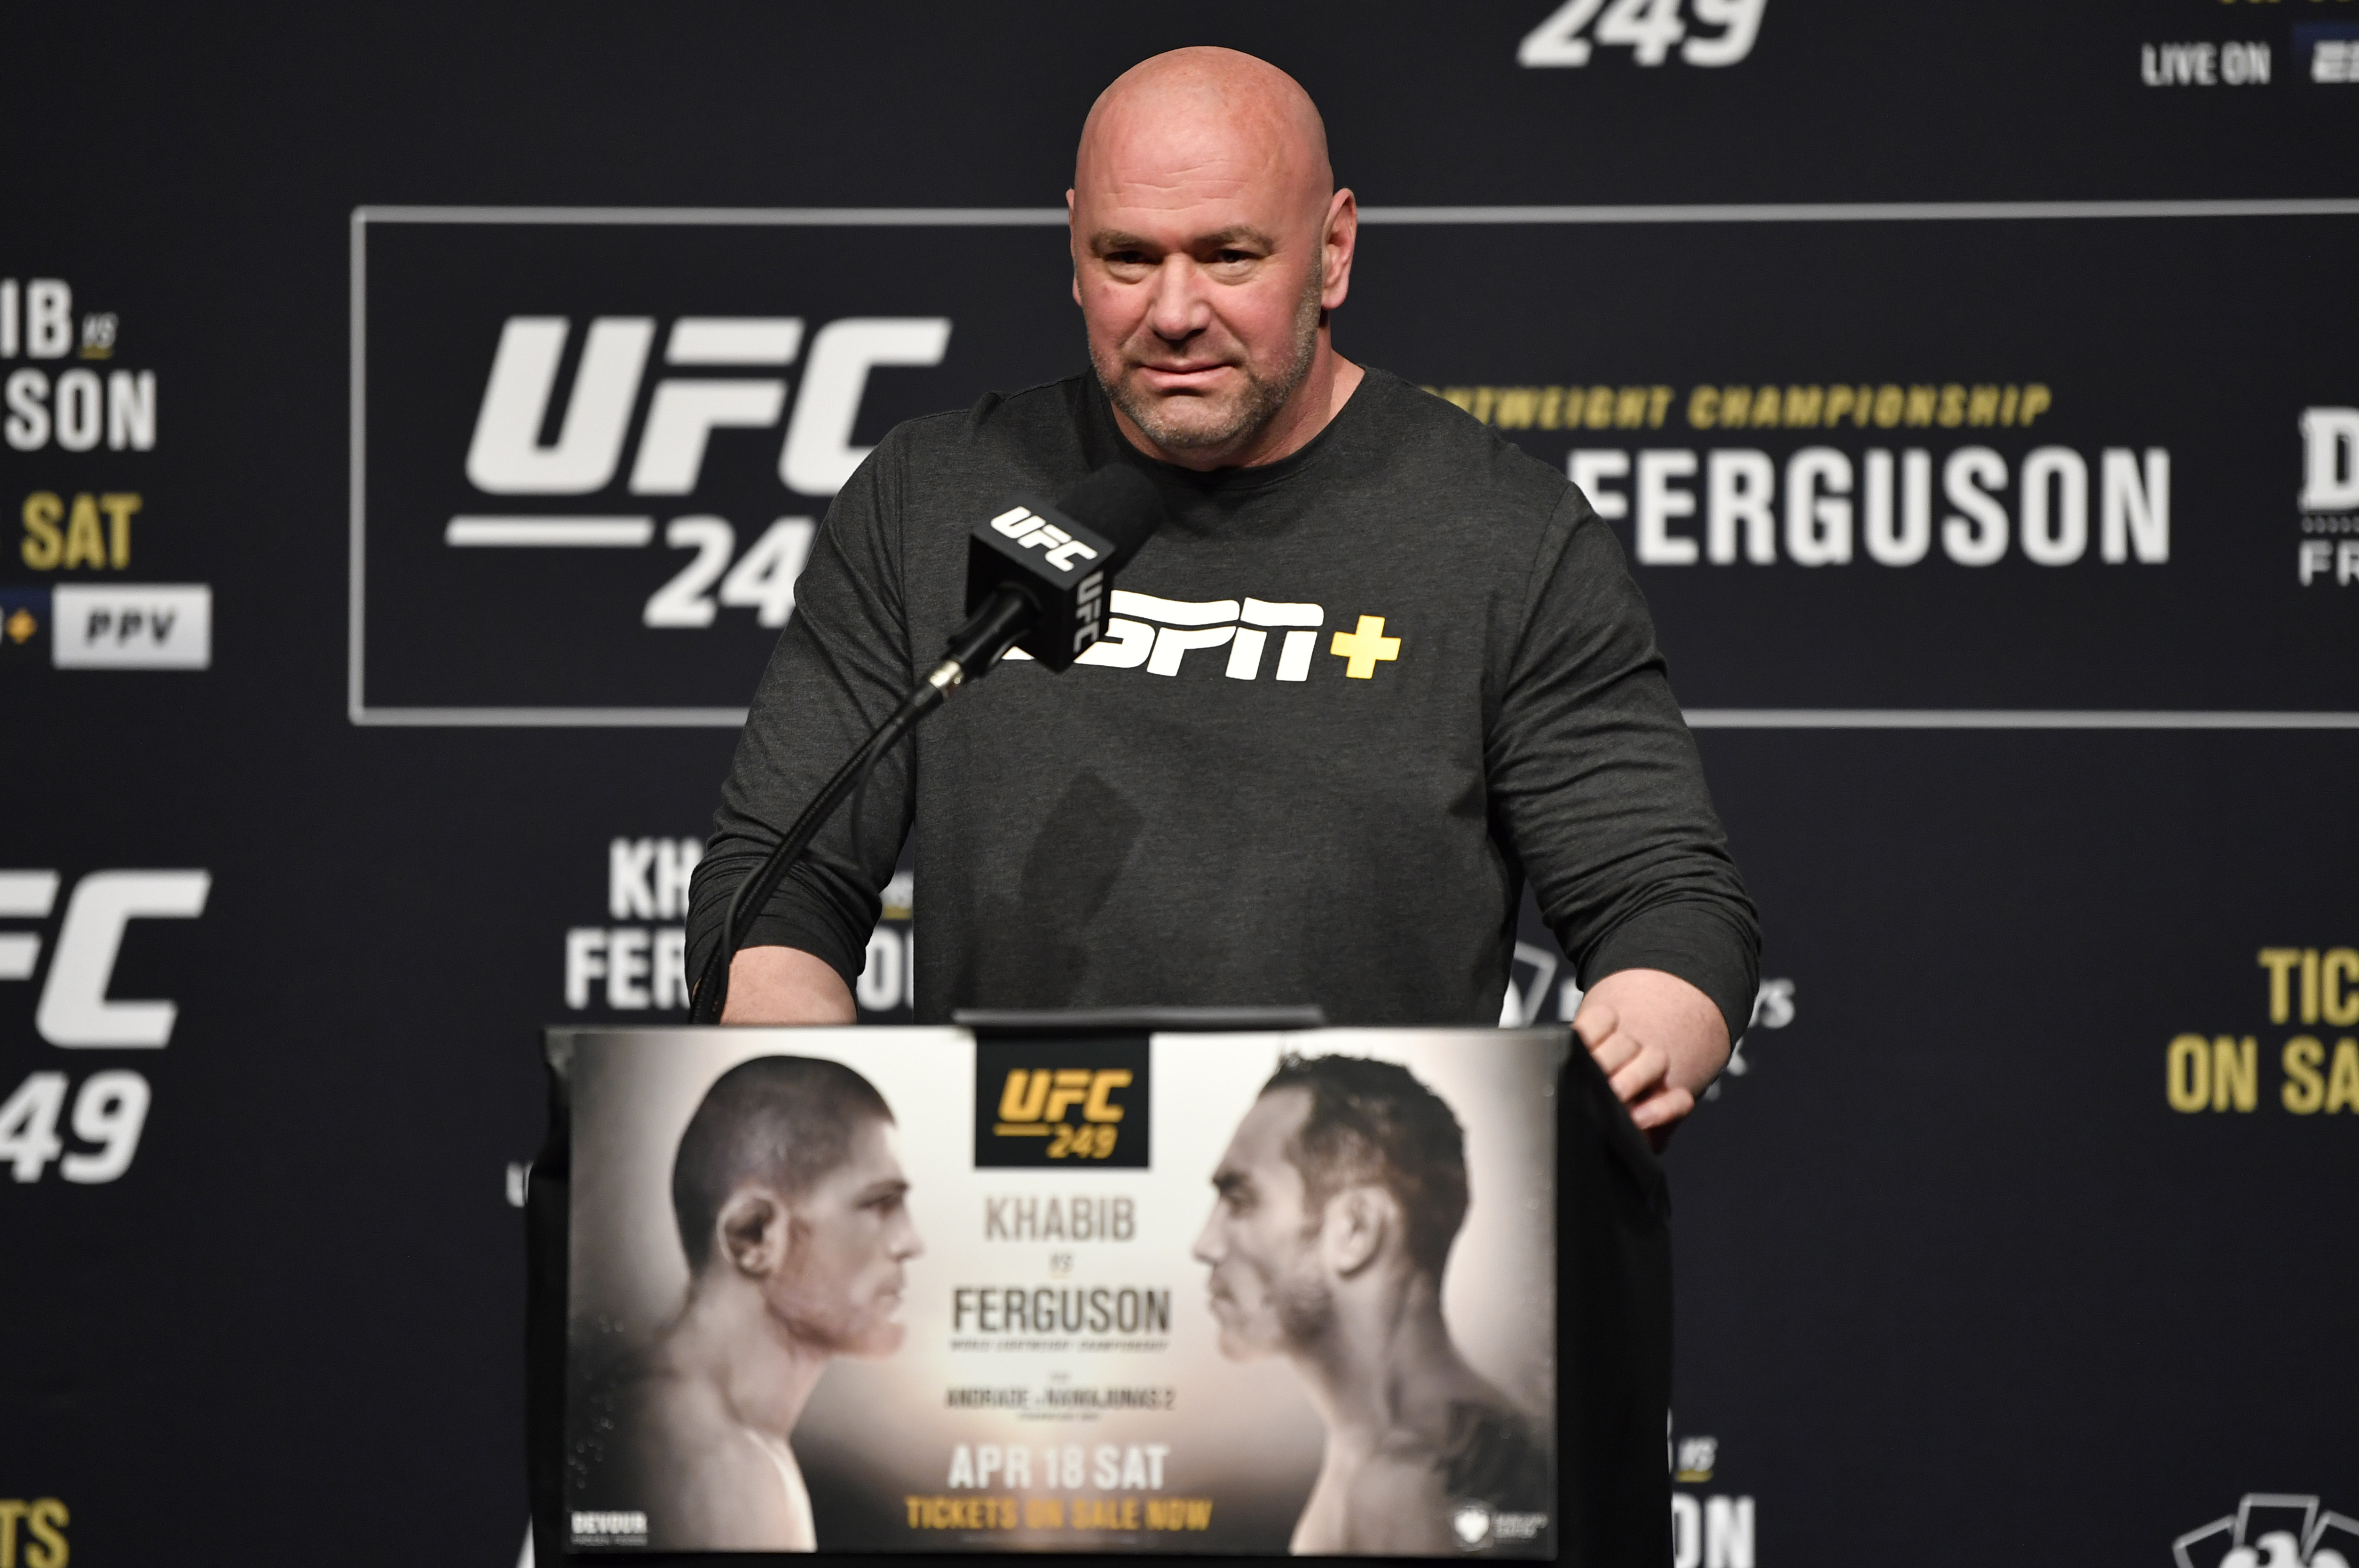 Florida offers UFC a ray of hope